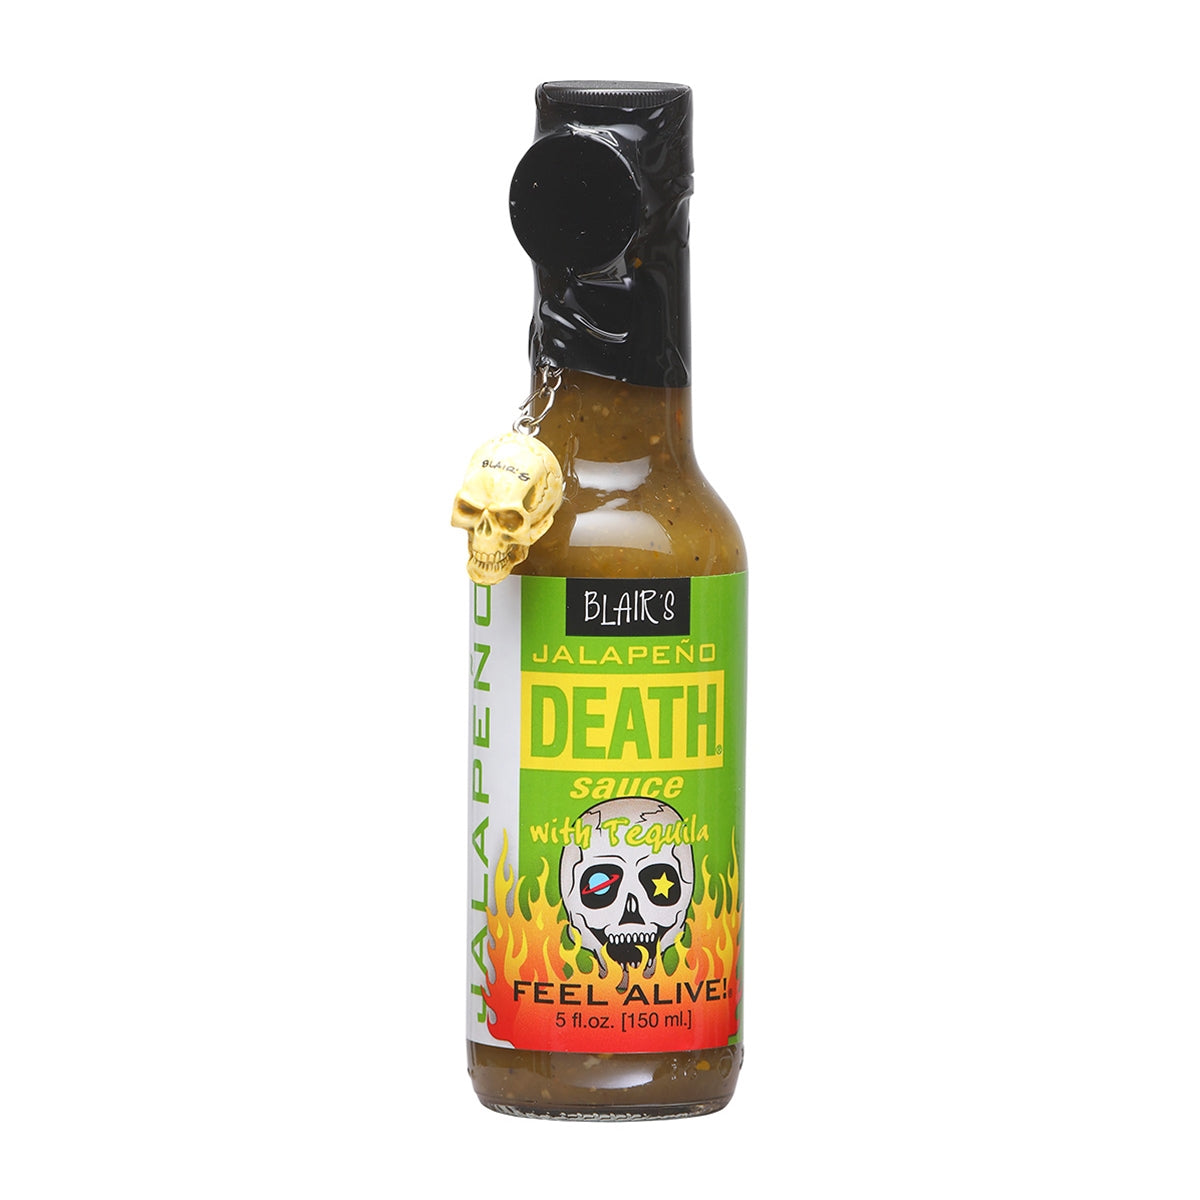 Hot Sauce Blairs Death Jalapeno with Tequila 5 oz Heat 7 Skull keychain